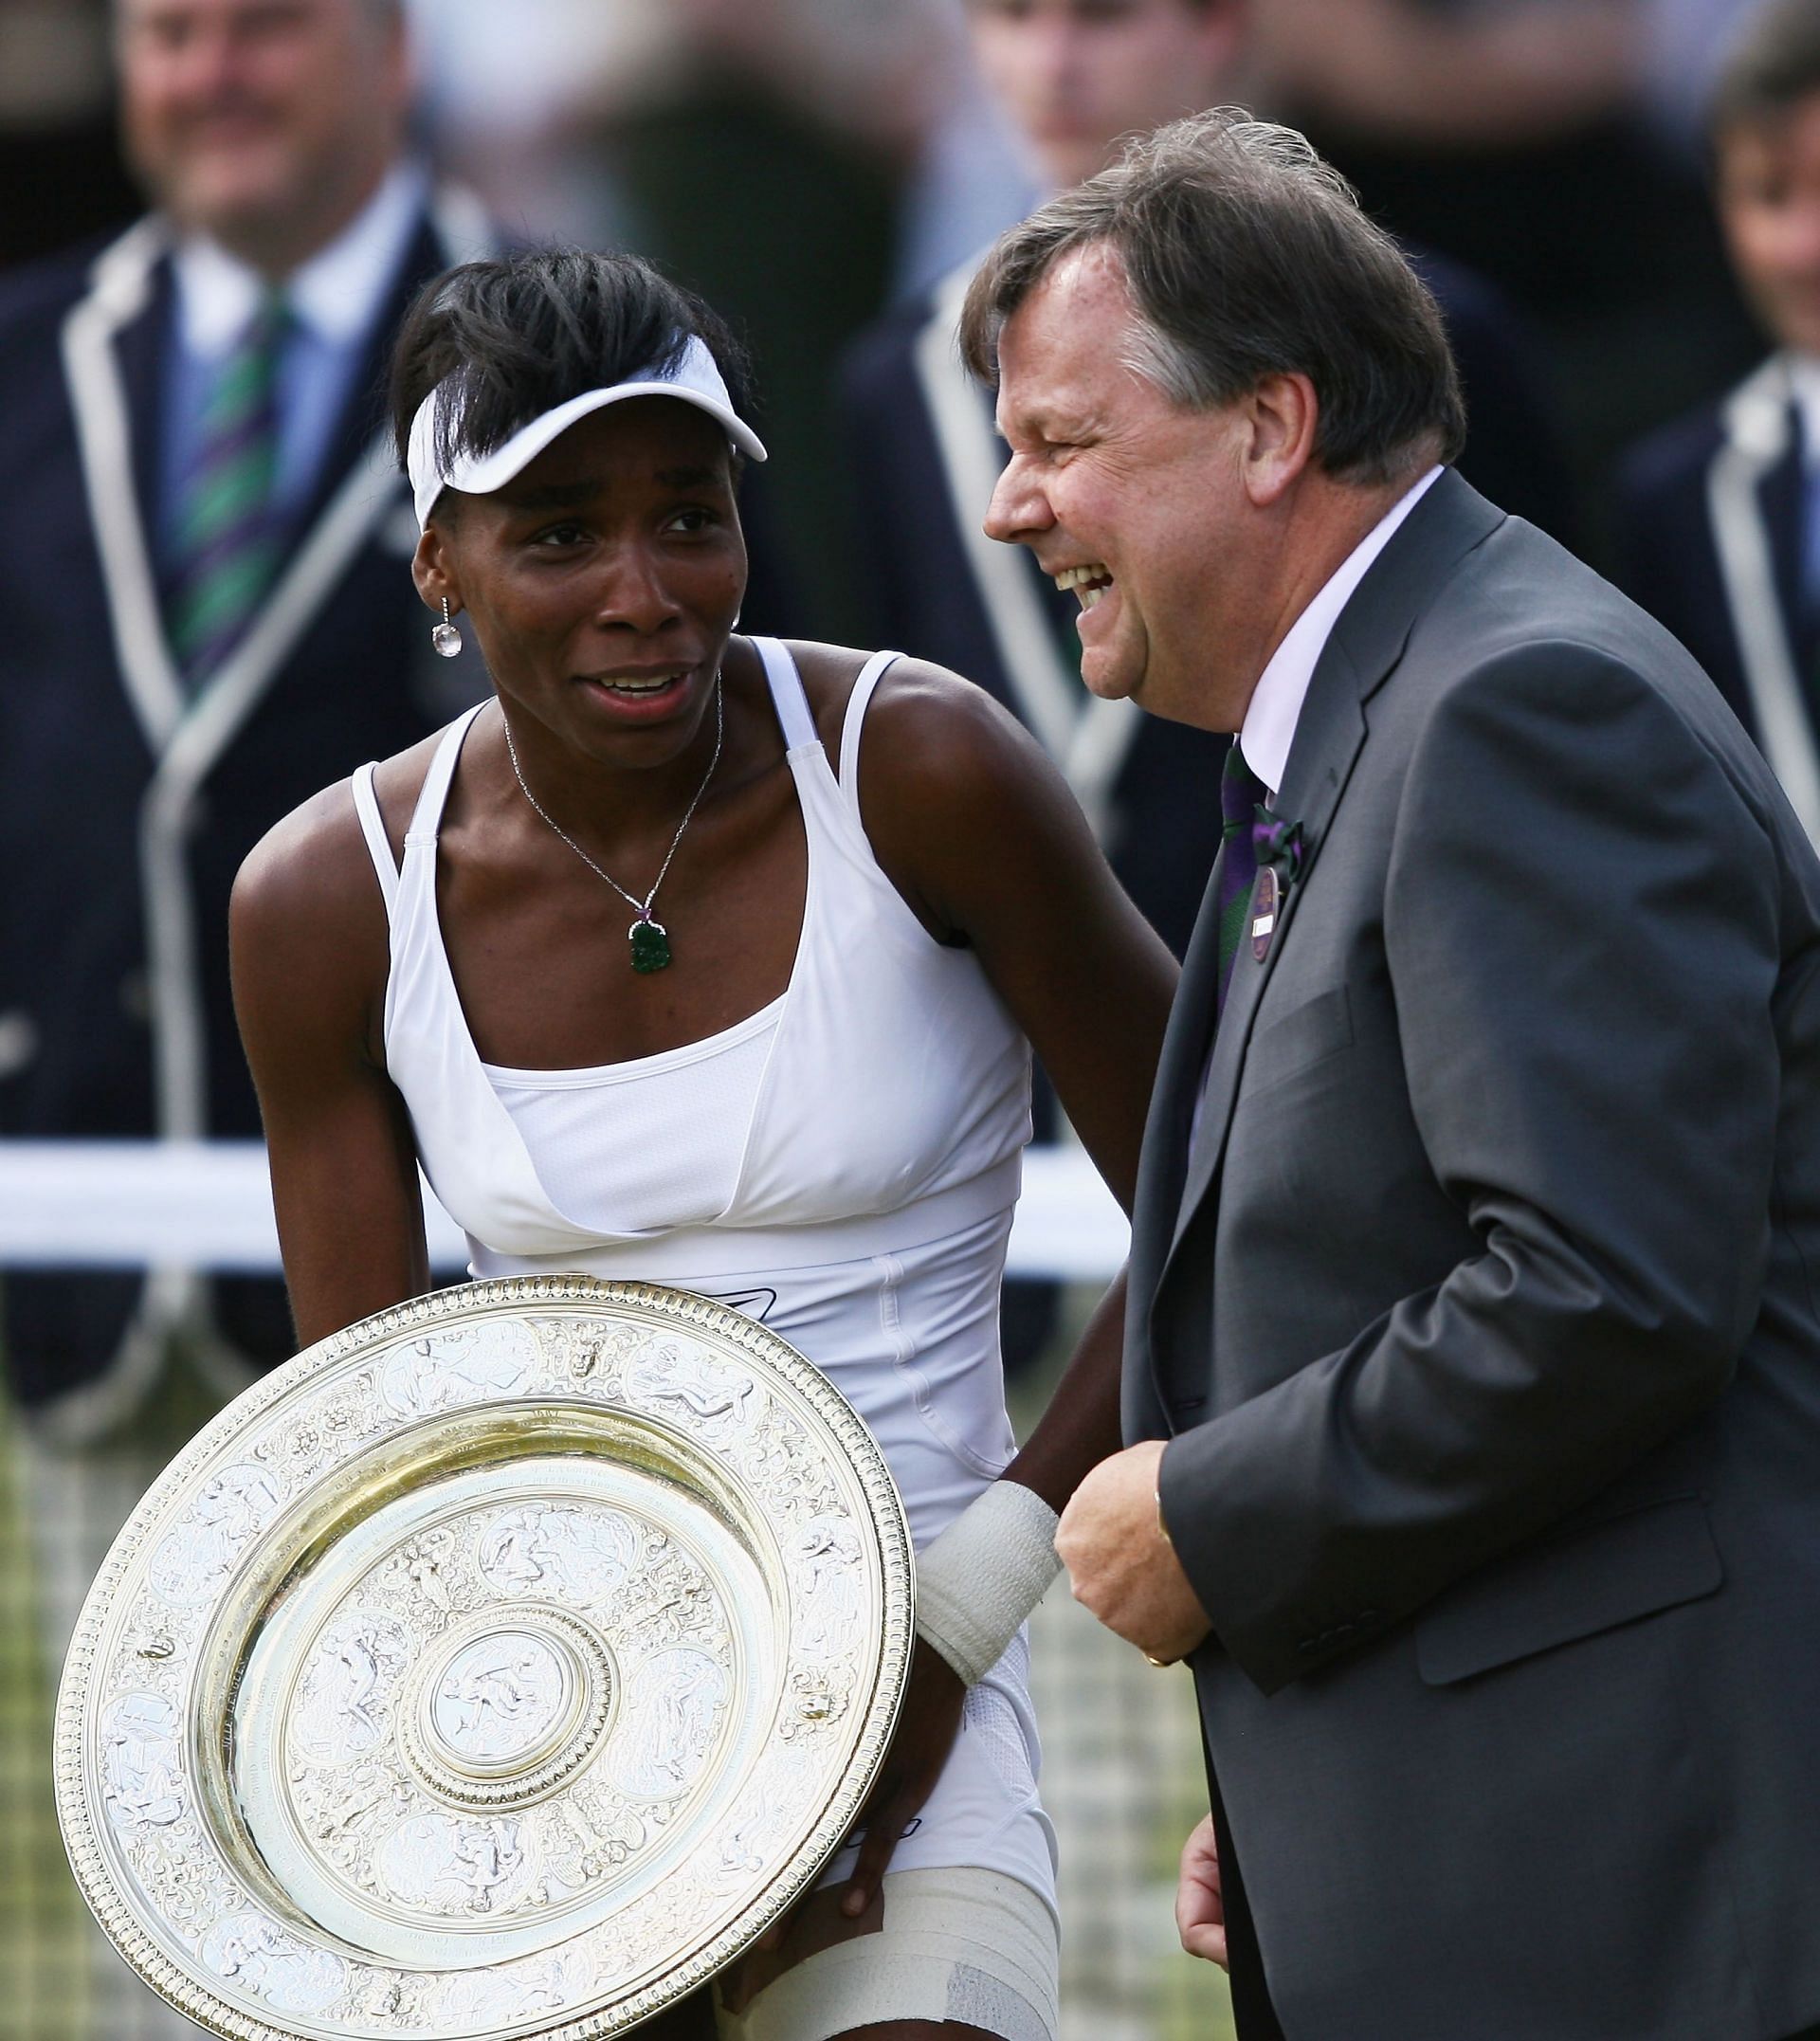 Venus Williams with the Wimbledon 2007 trophy